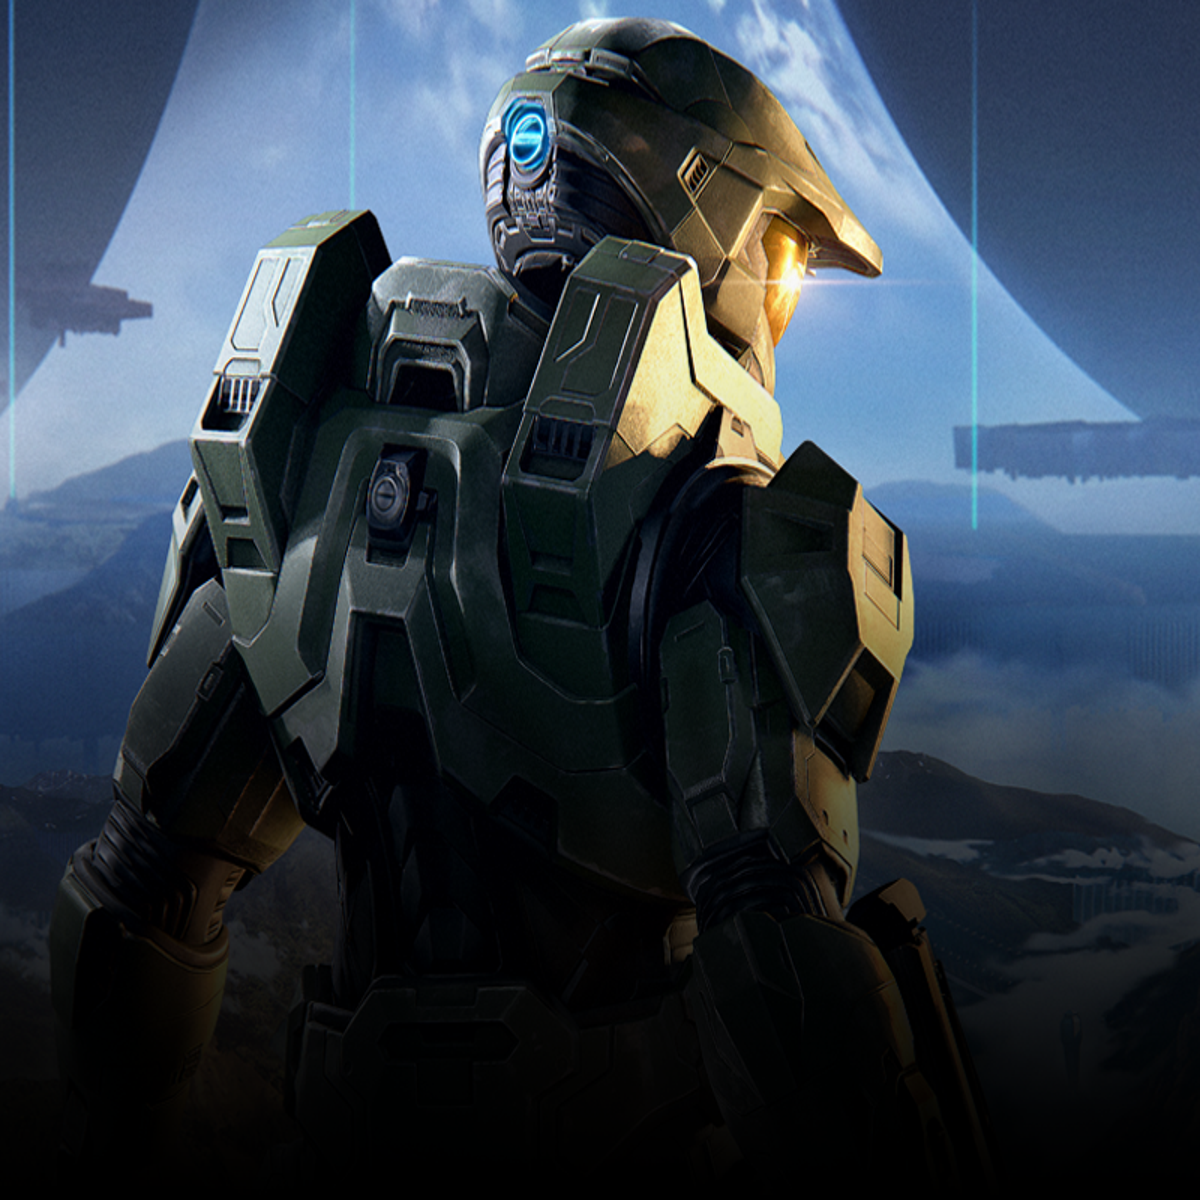 The Cast for the Halo Showtime Television Series Has Been Announced